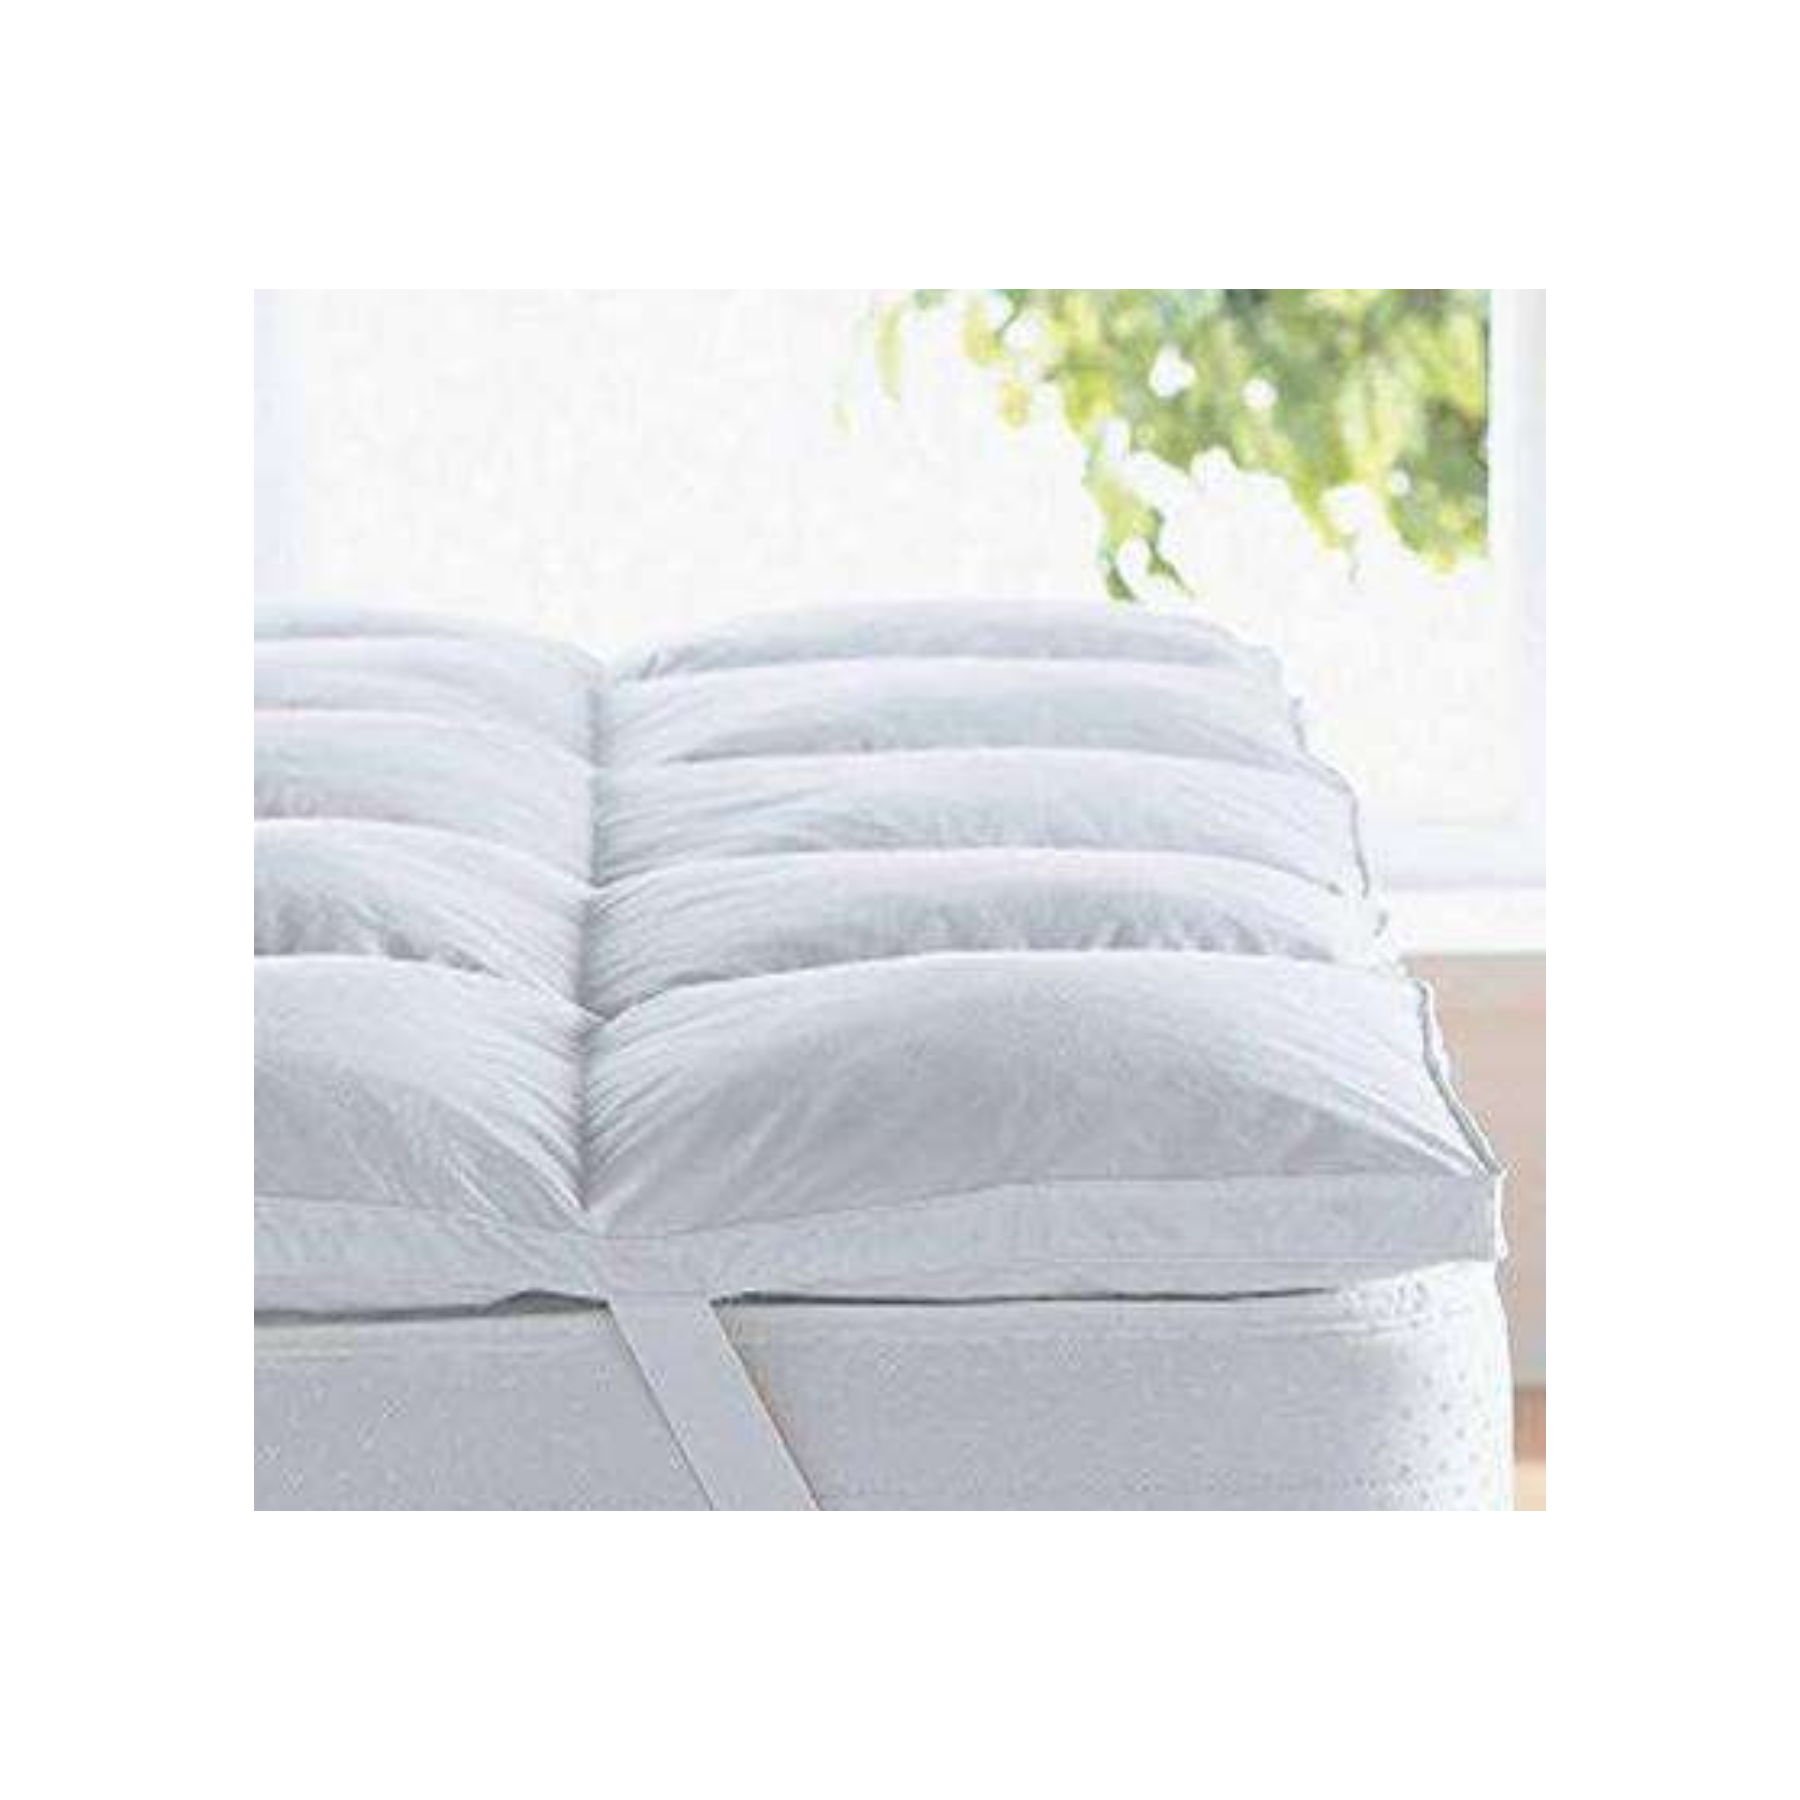 Free Shipping on this Queen Size Plush Goose Mattress Topper - Premium Quality!